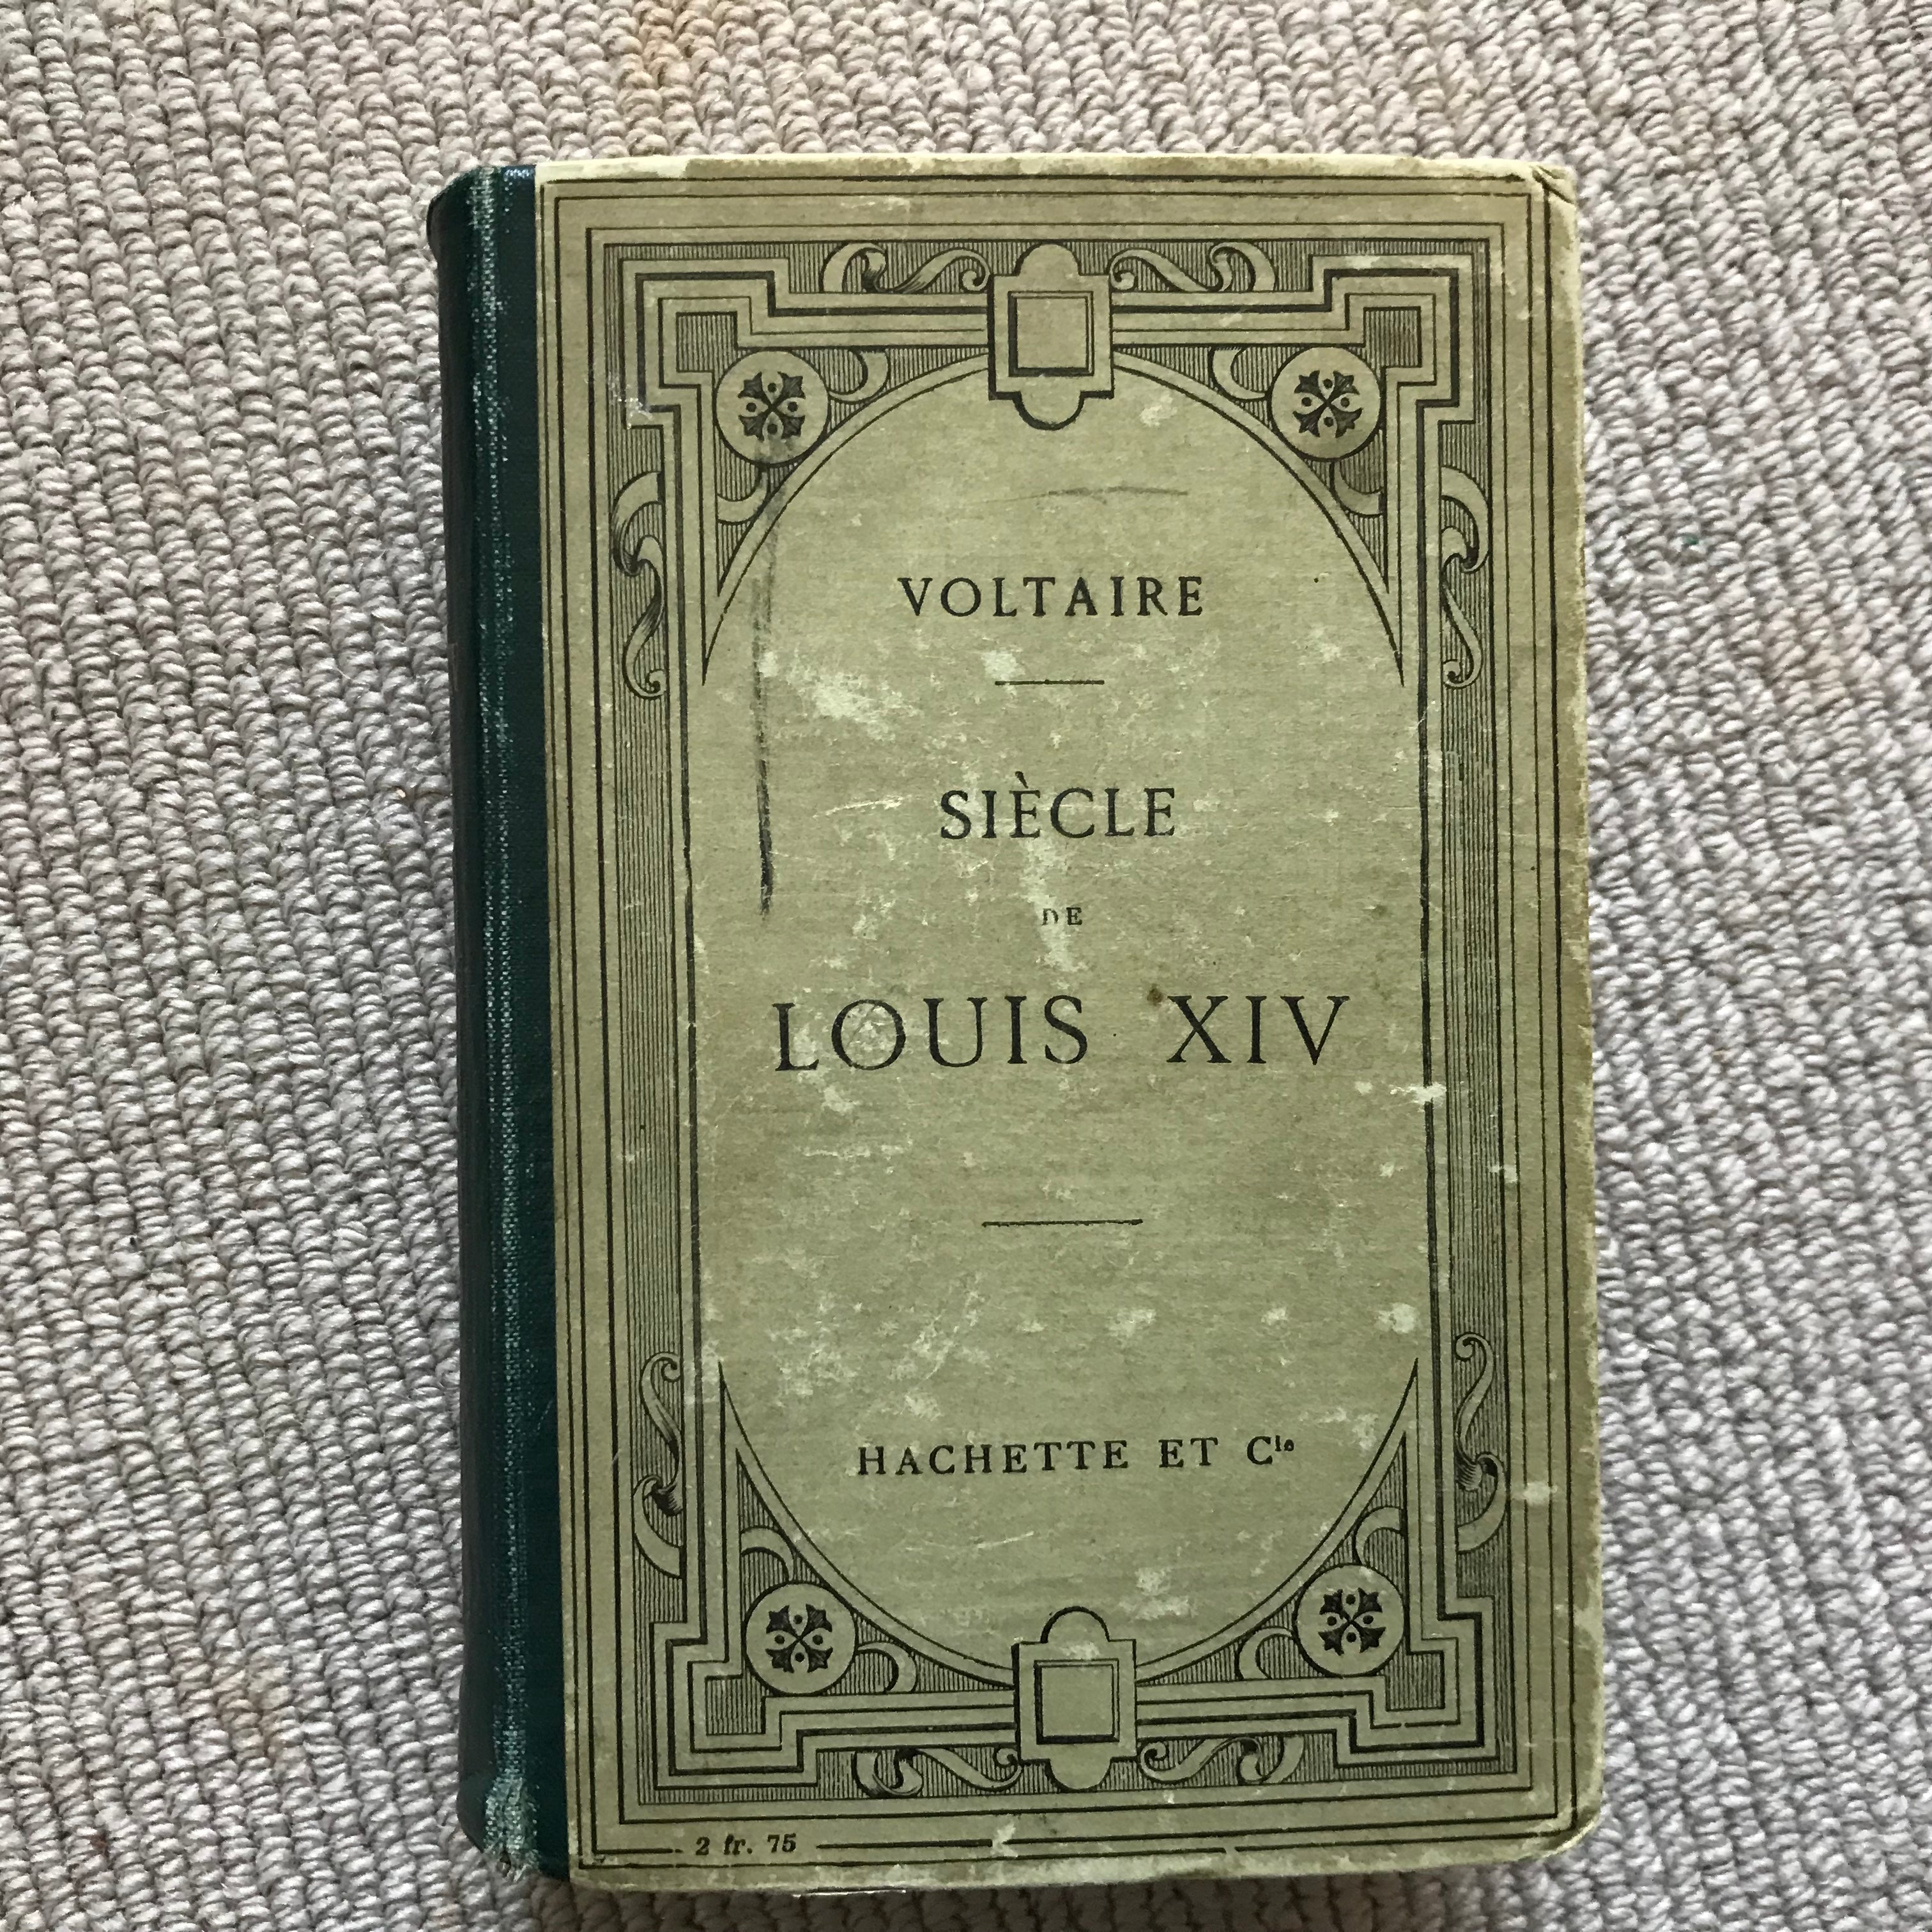 The age of Louis XIV. by Voltaire